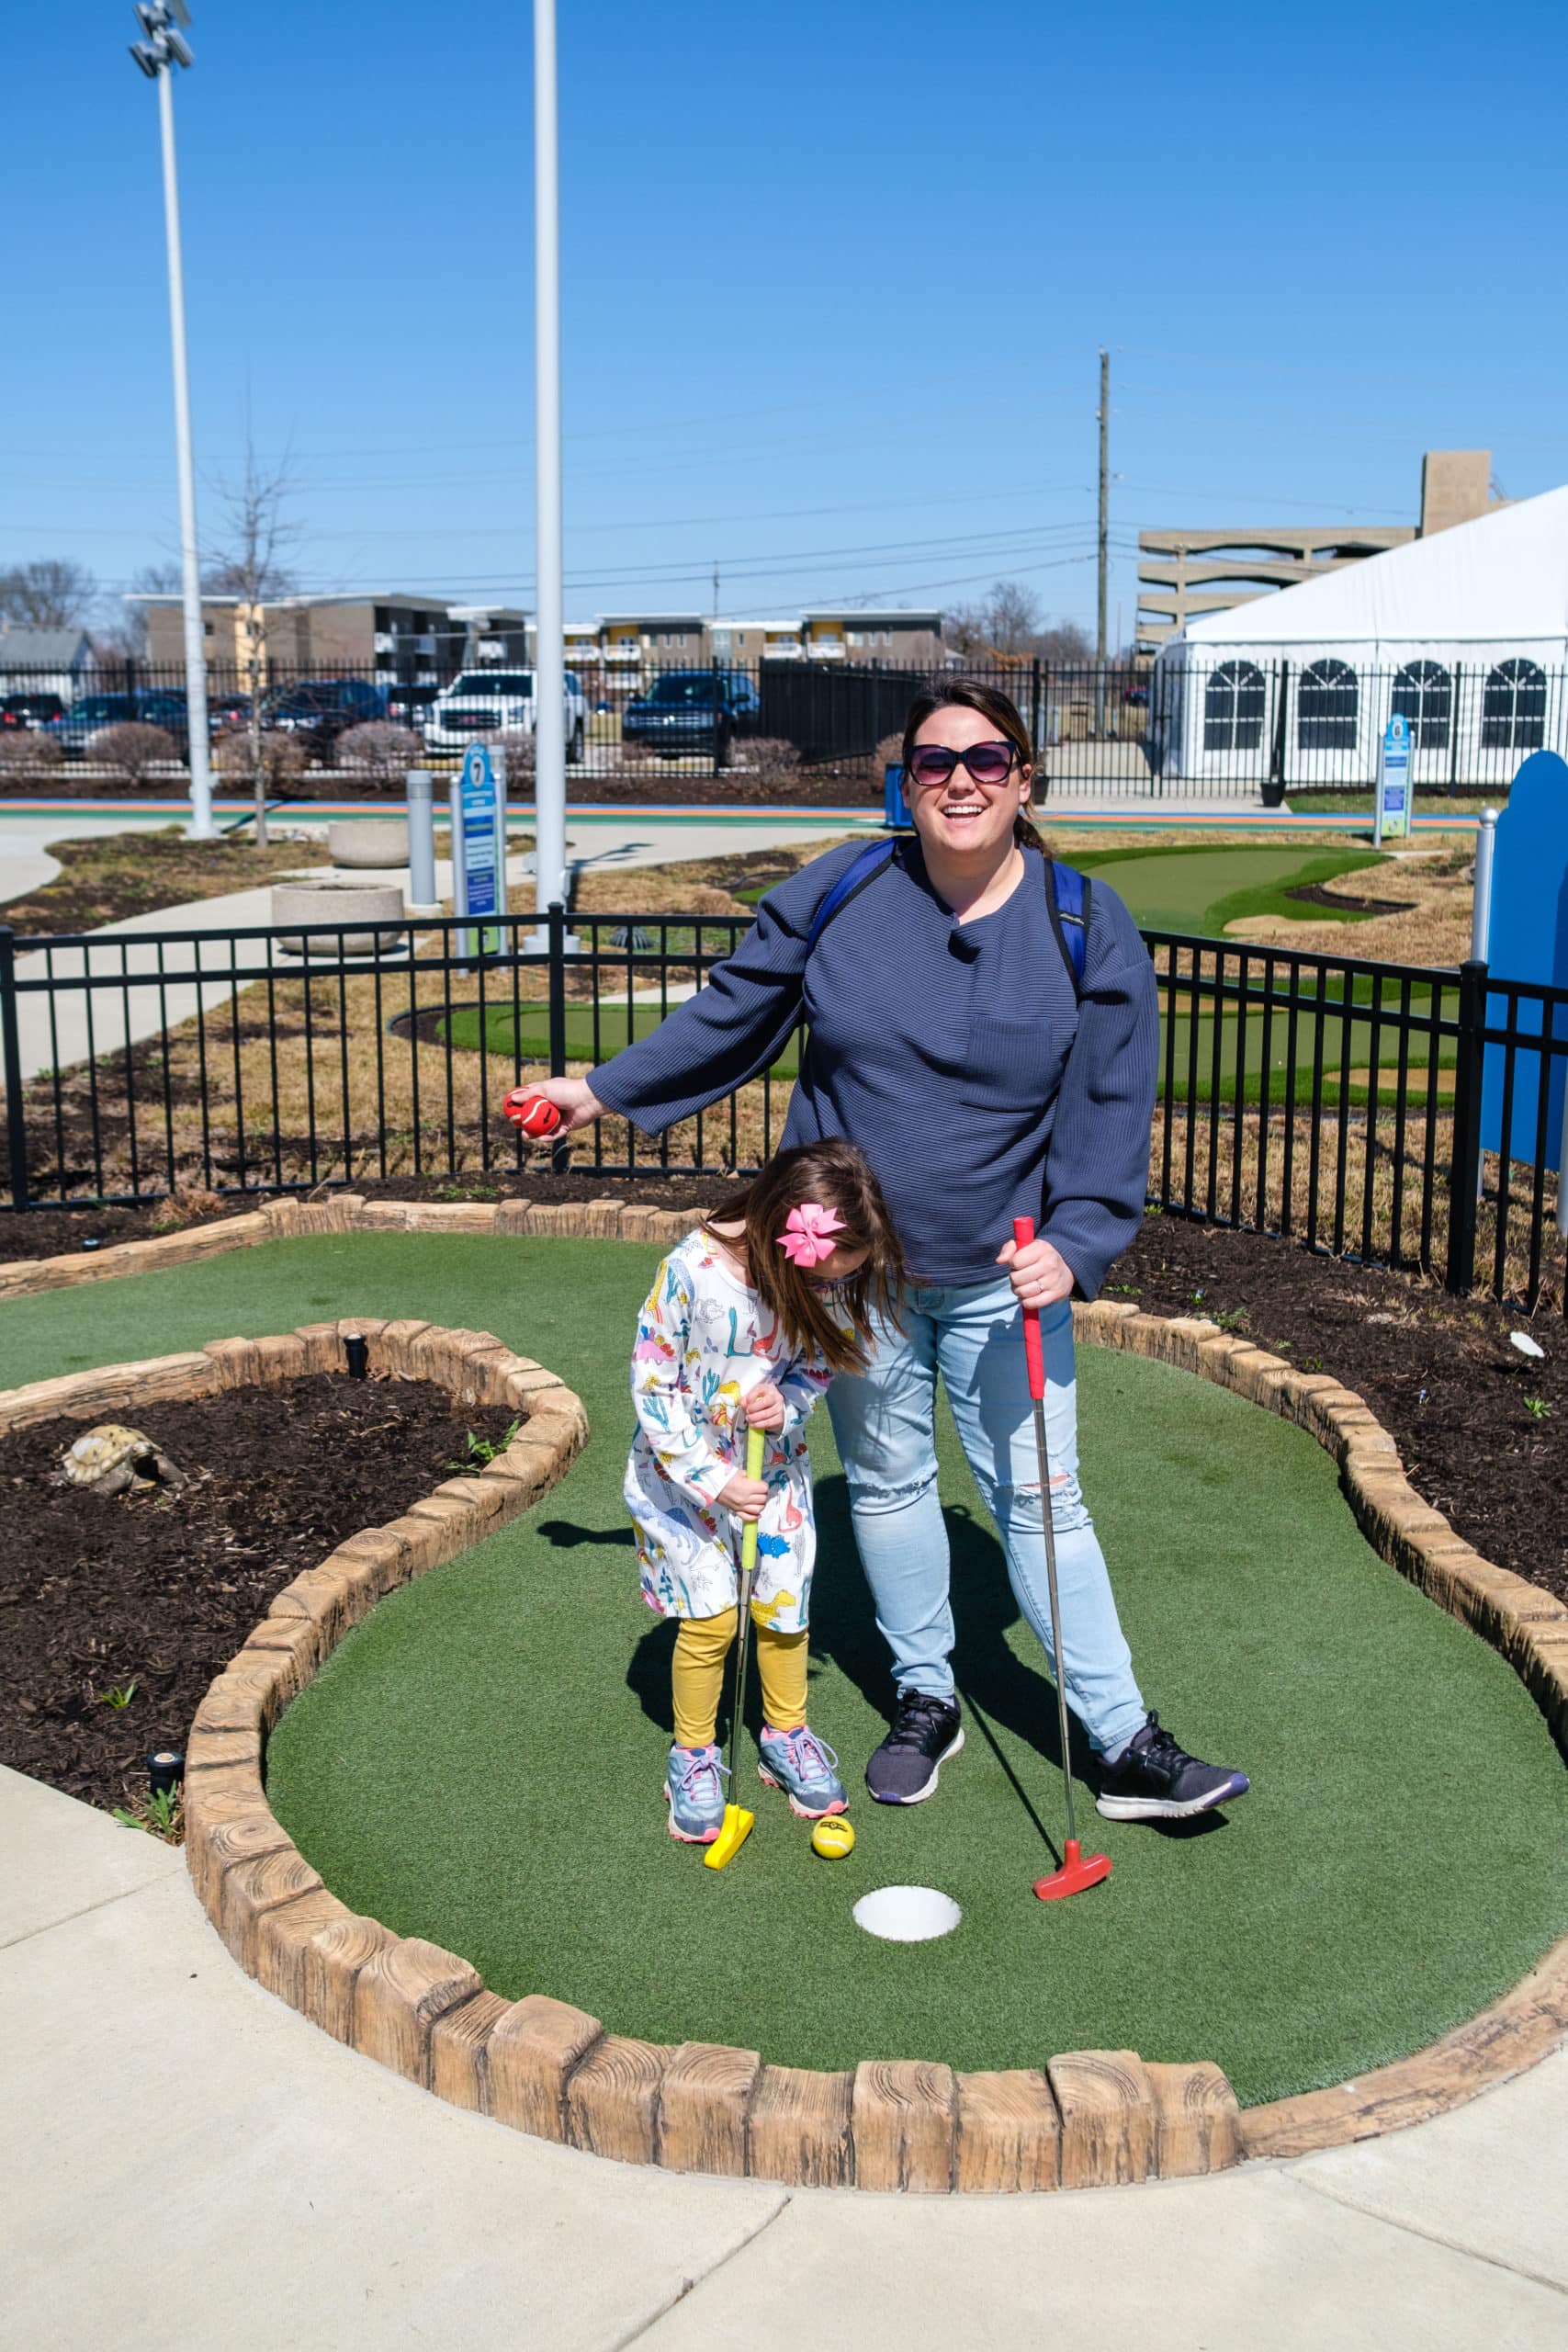 Outdoor mini golf at the Children's Museum Of Indianapolis.